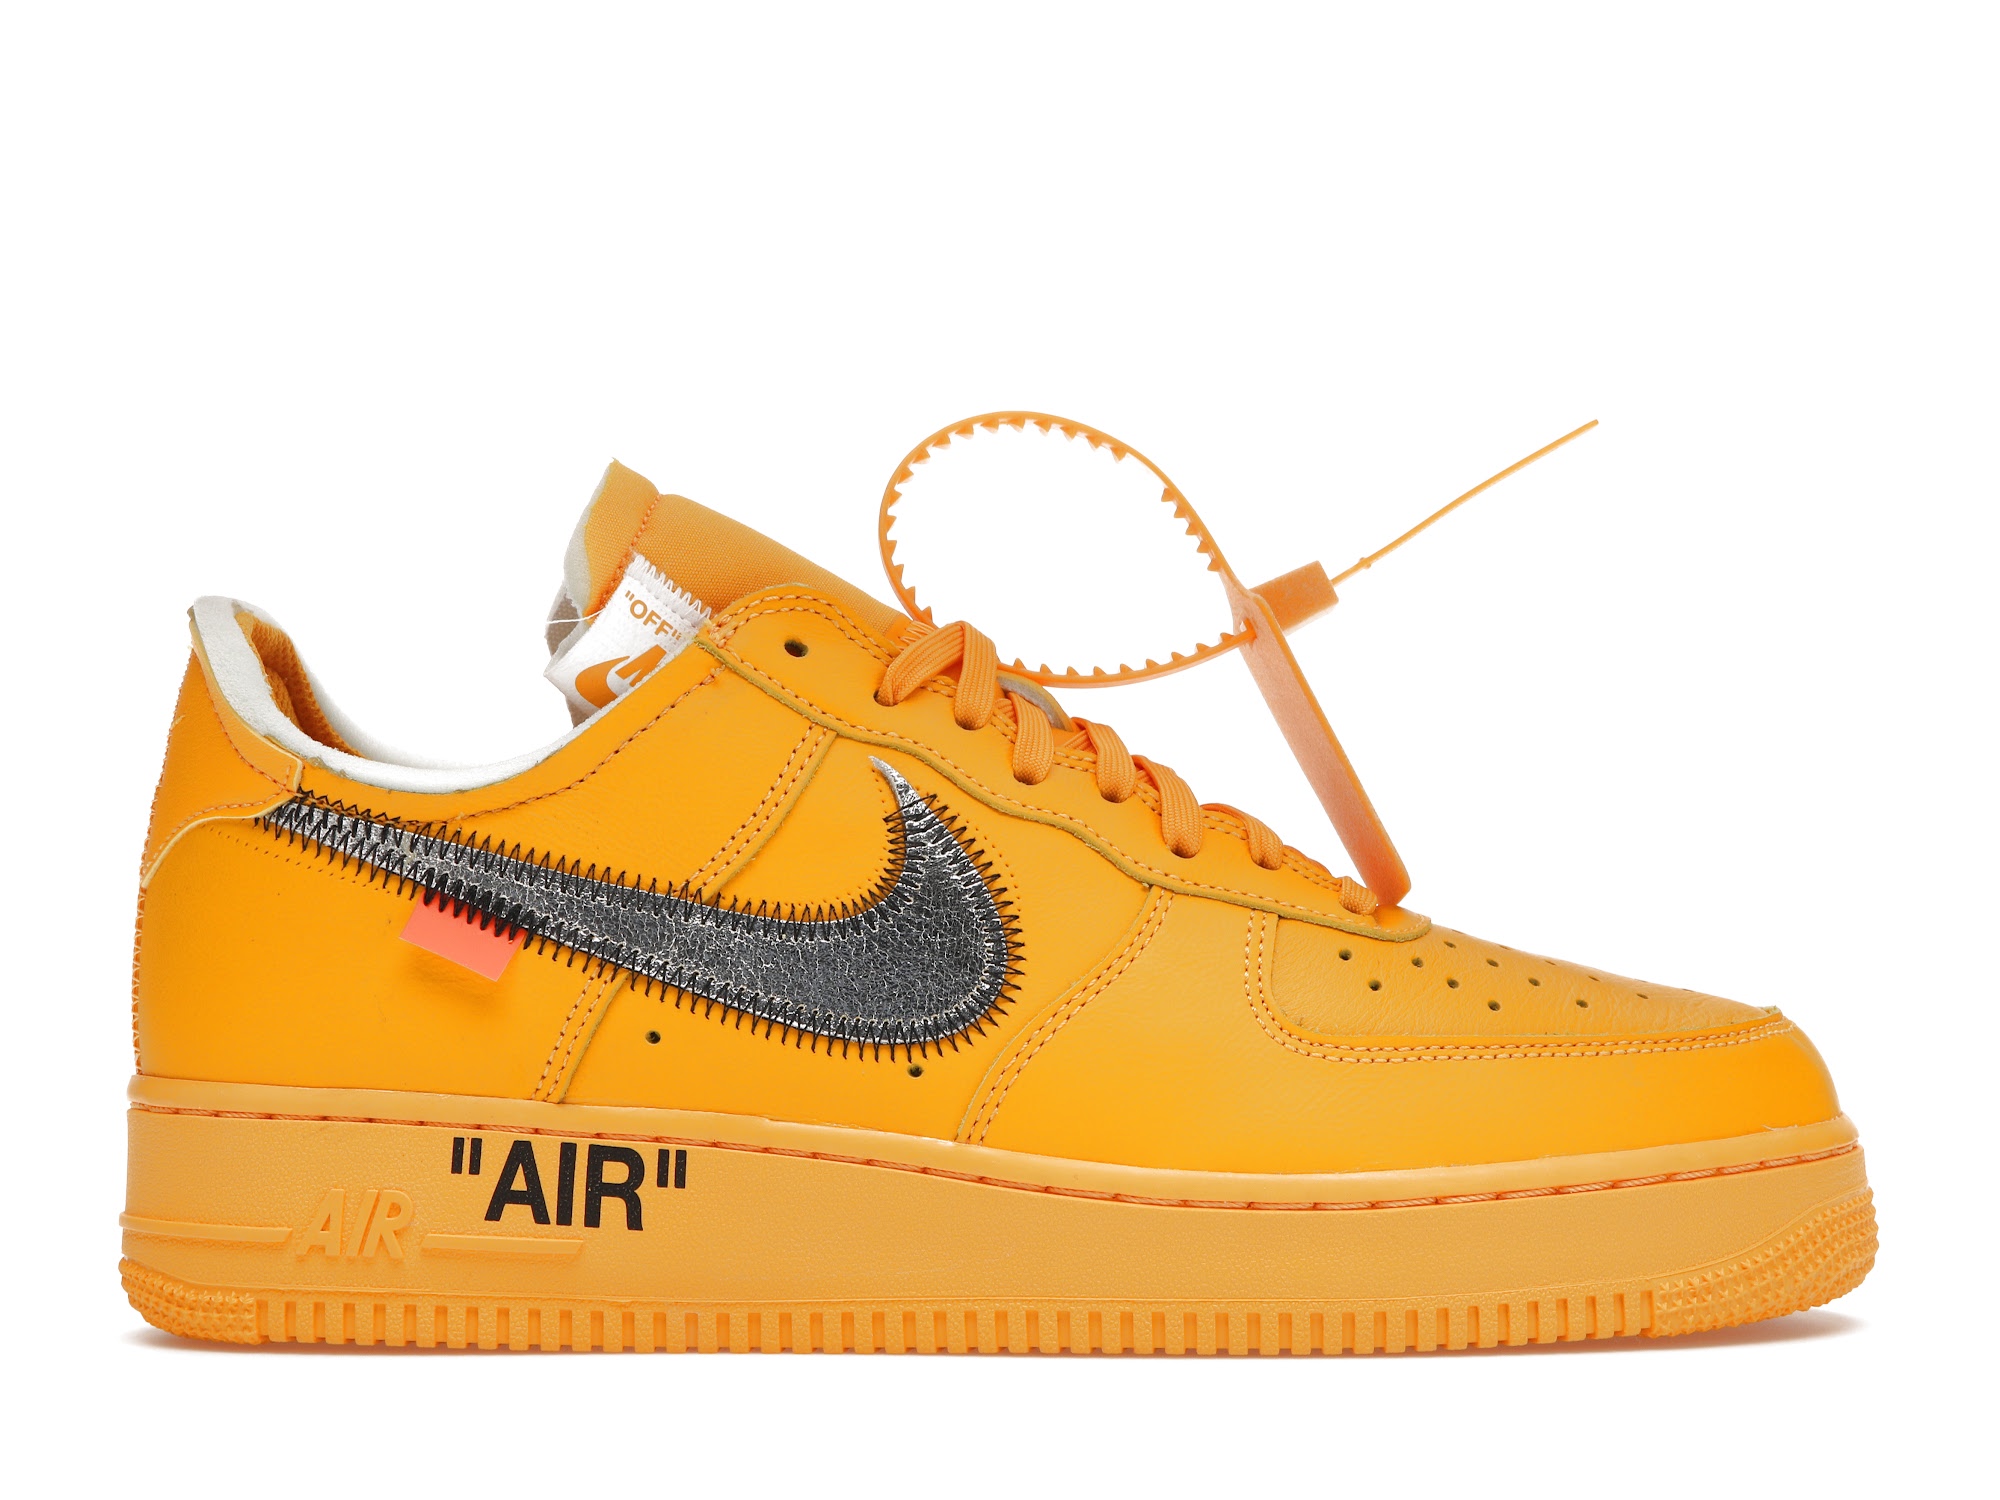 Nike Air Force 1 Low Off-White ICA University Gold Men's - DD1876 